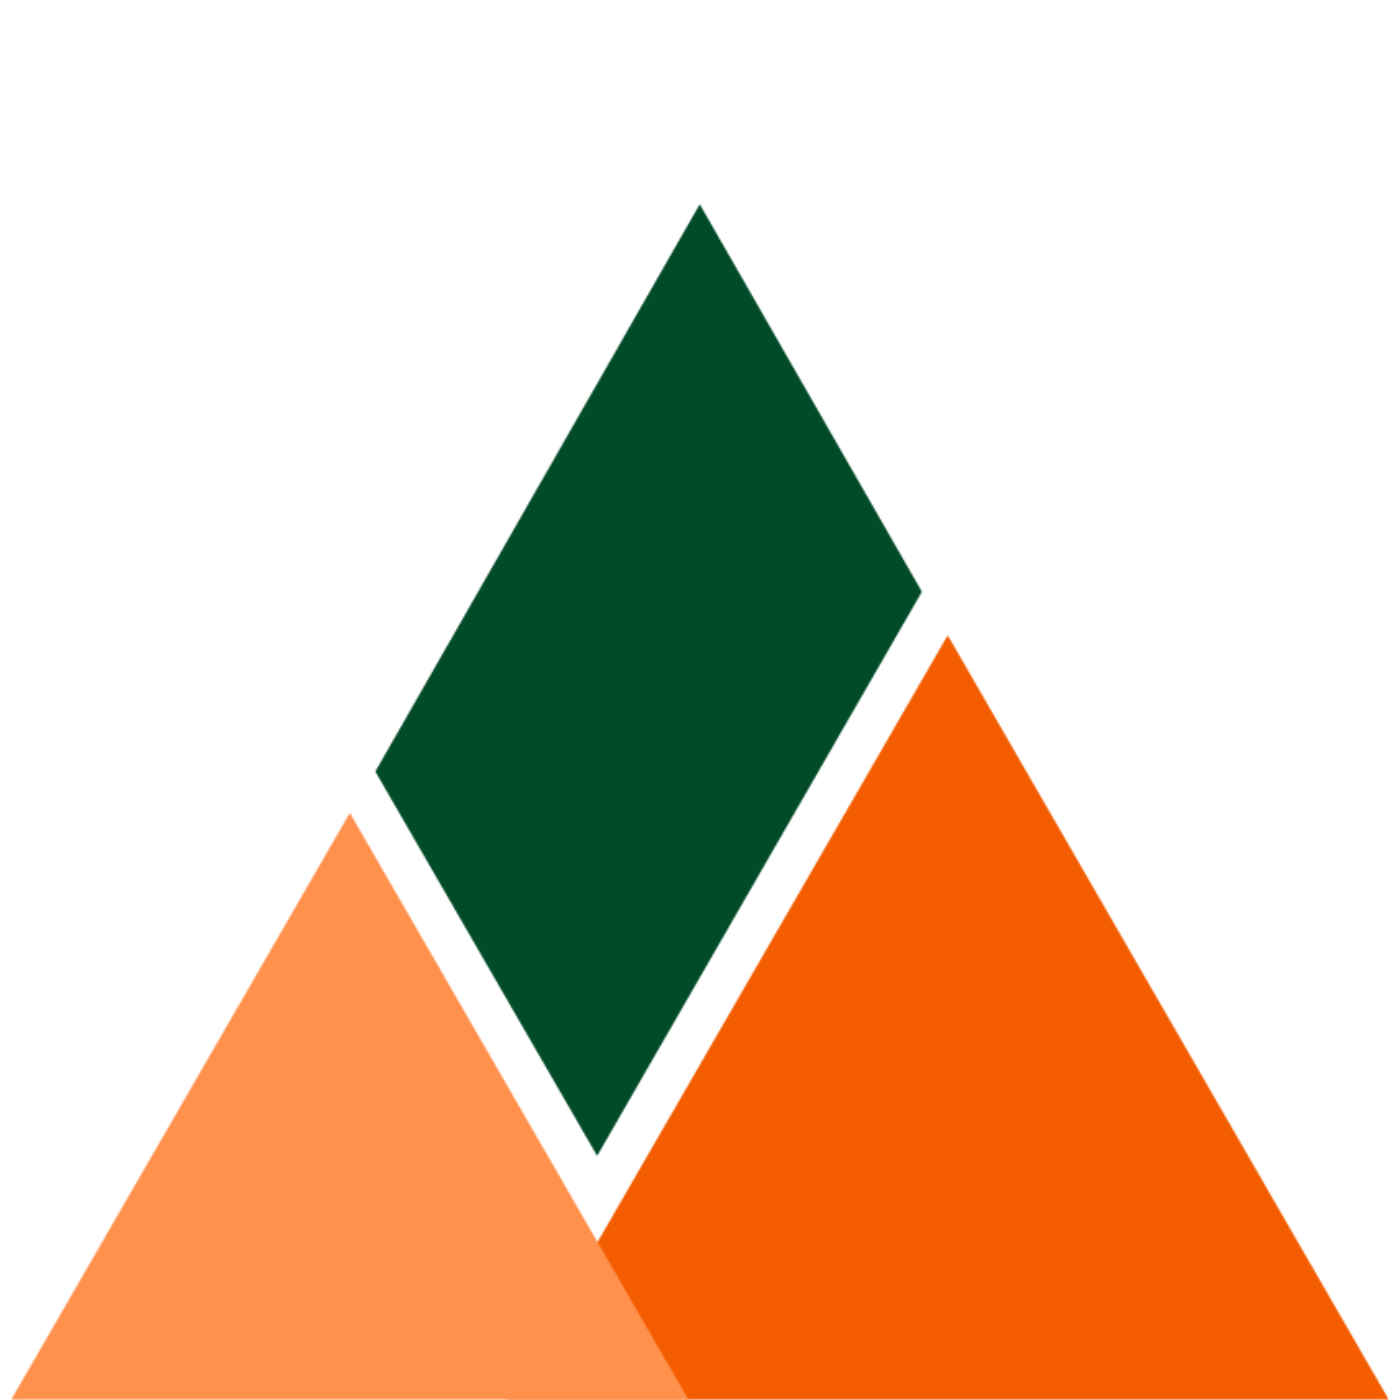 A triangle with three triangles inside, green and two different shades of orange. Between the triangles is white space in a tick shape